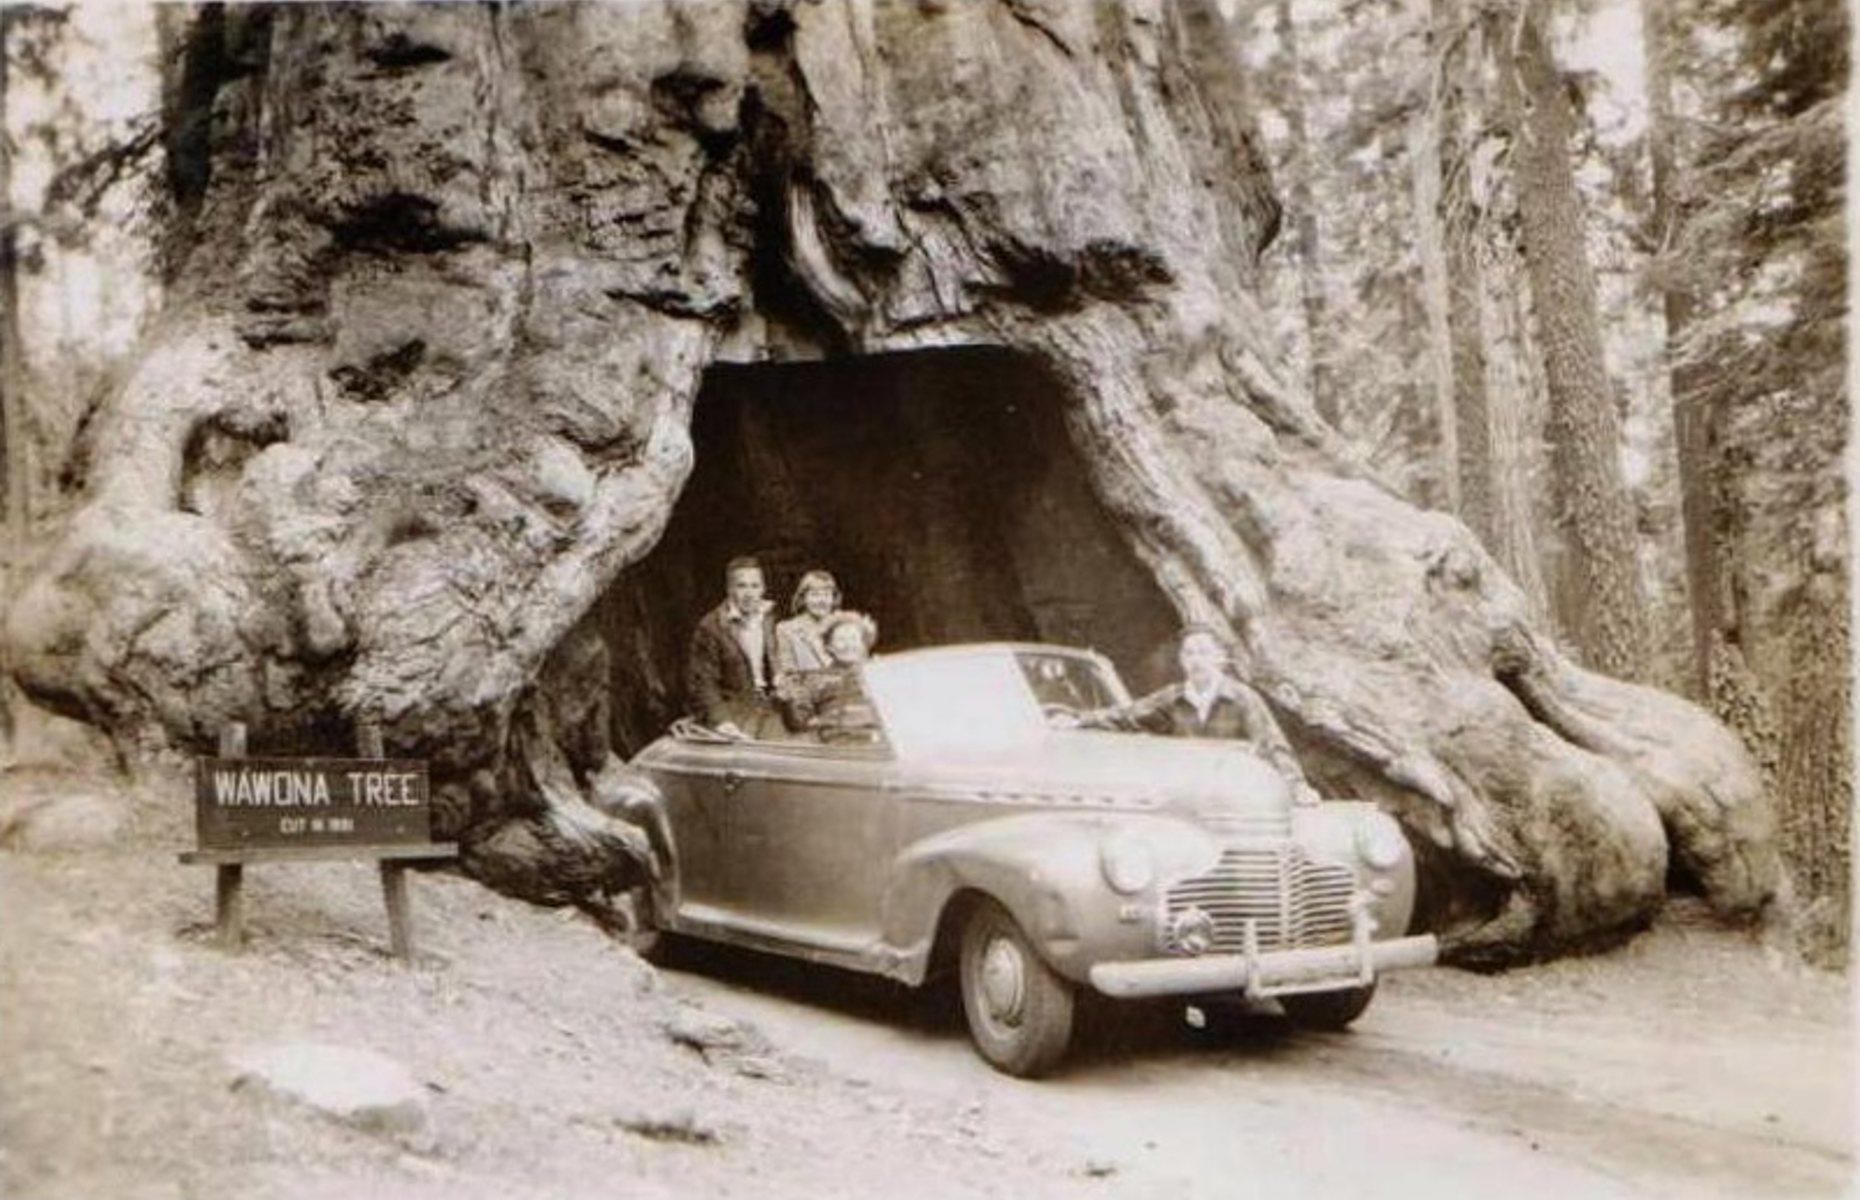 <p>Through the 1960s Yosemite felt the weight of its reputation as an increasingly sought-after tourist destination. Eighty-eight years after a tunnel was cut through its trunk as a visitor attraction and photo opportunity, the Wawona Tree (pictured here in 1946) fell during the winter of 1968-69. The national park was also a known gathering place for nature-loving, free-spirited Californians, with one newspaper at the time claiming there were "more hippies than bears" in Yosemite. </p>